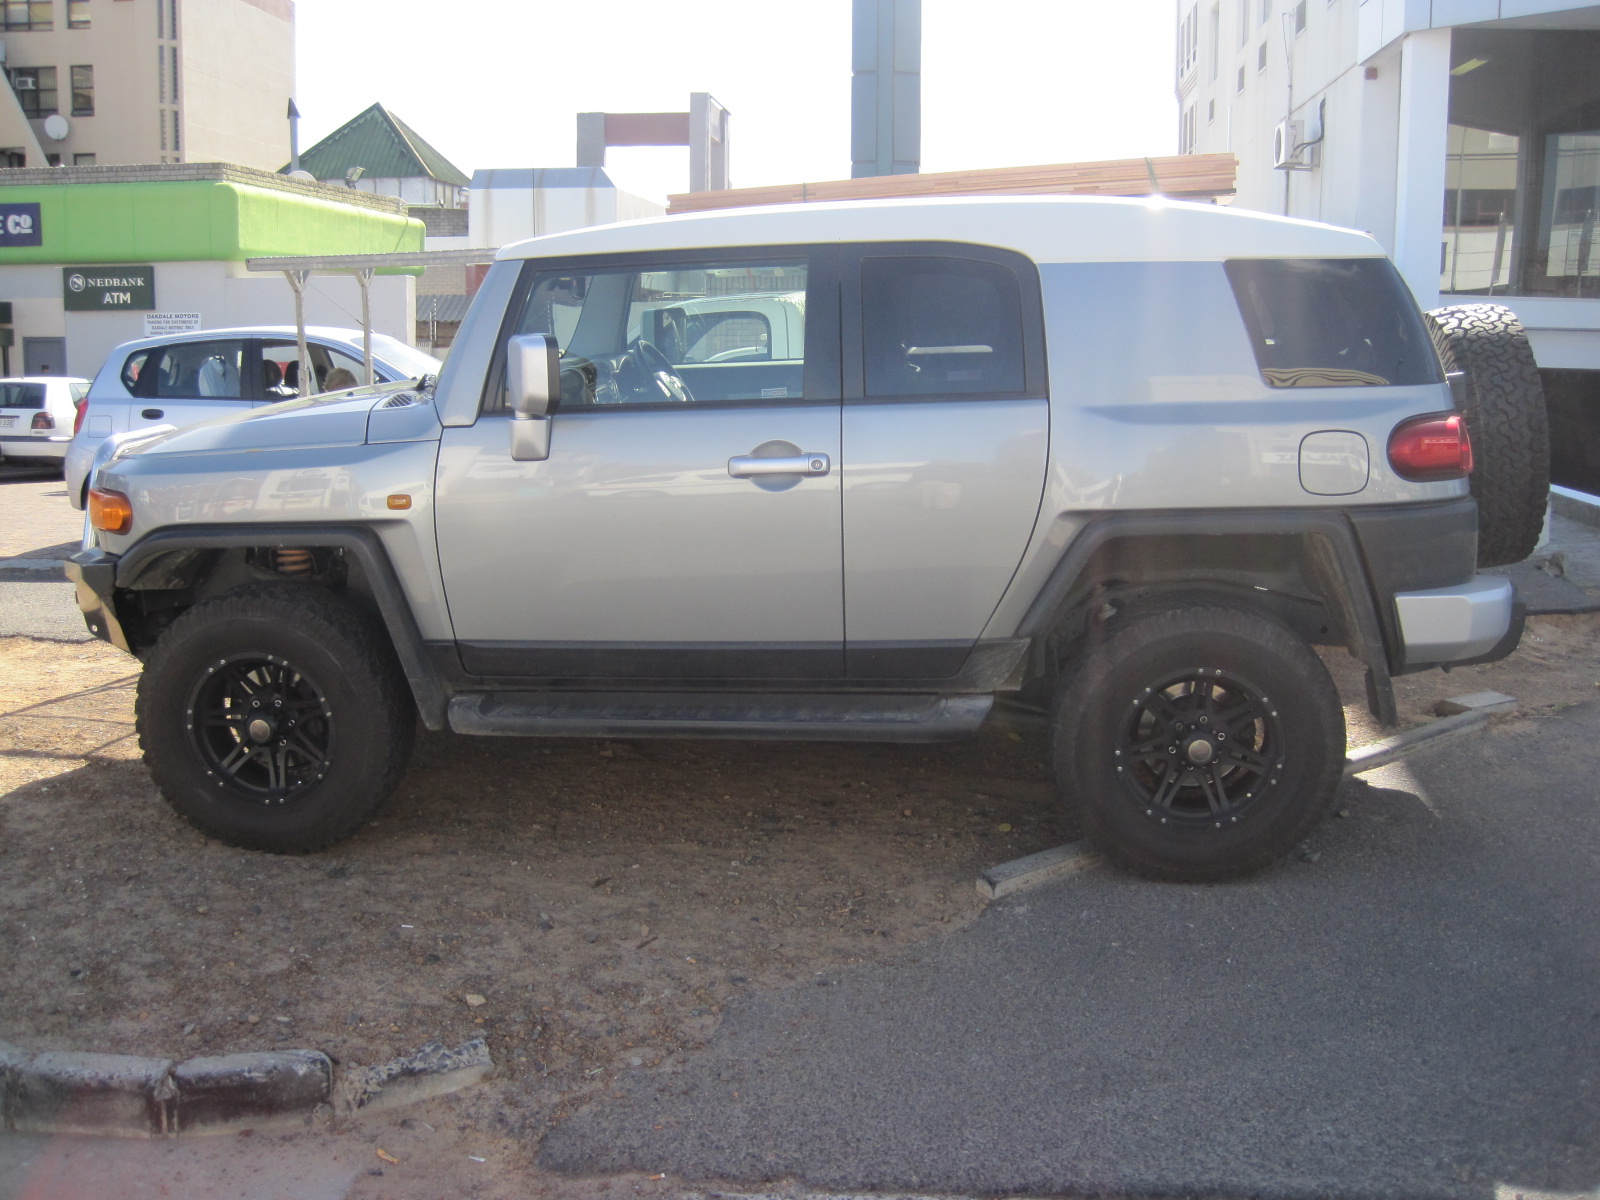 Gumtree Olx Cars And Bakkies For Sale In Cape Town Olx Used